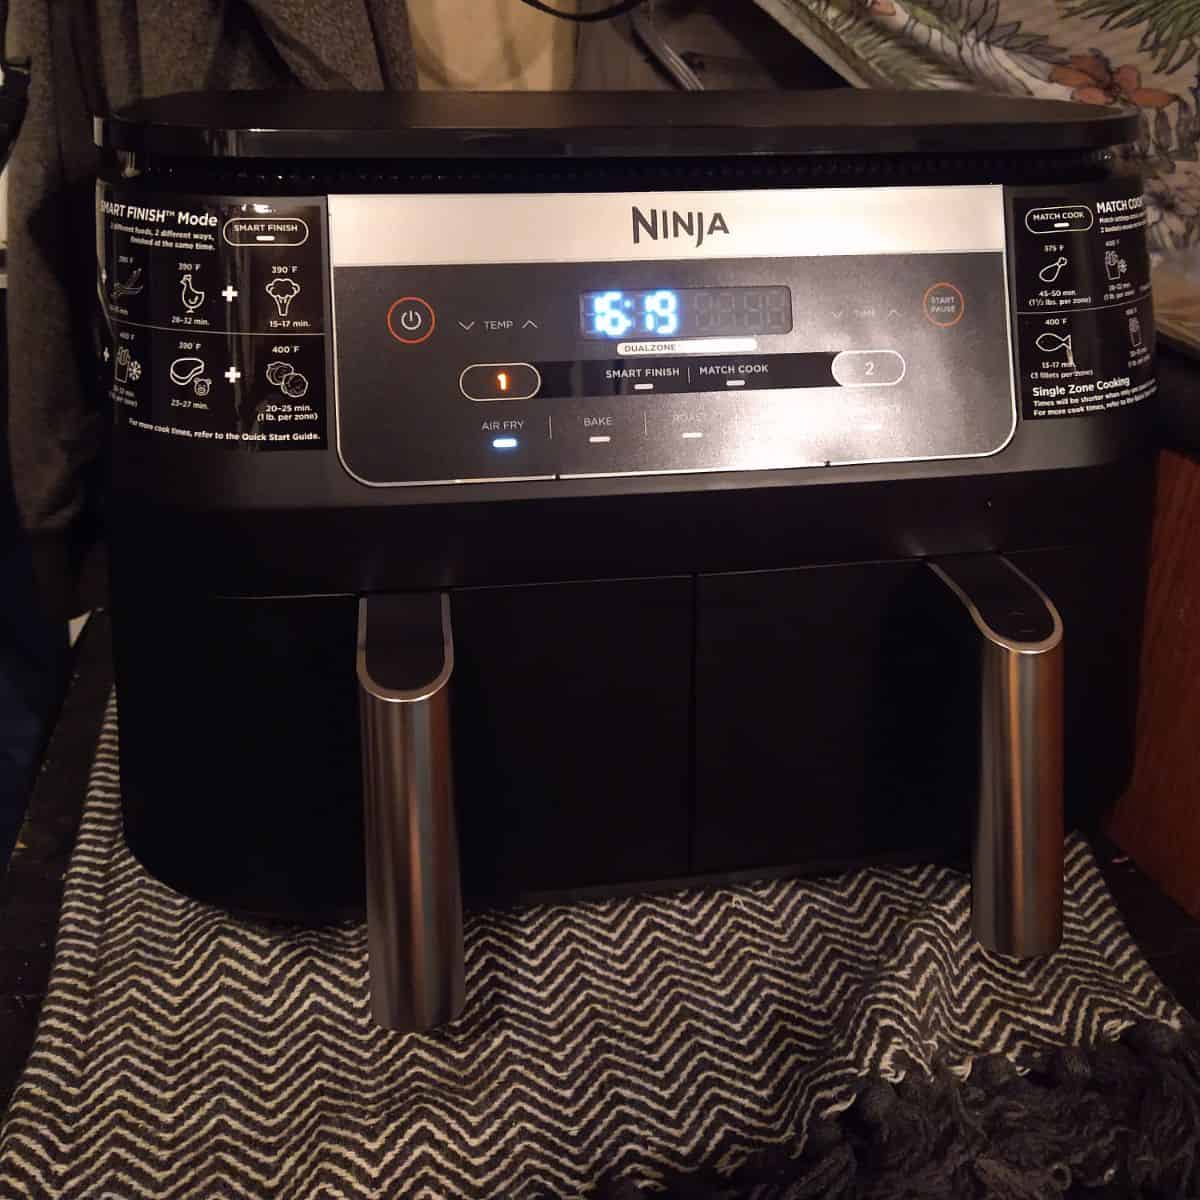 A black Ninja dual basket air fryer set to air fryer with 16 minutes and 19 seconds showing on the clock.